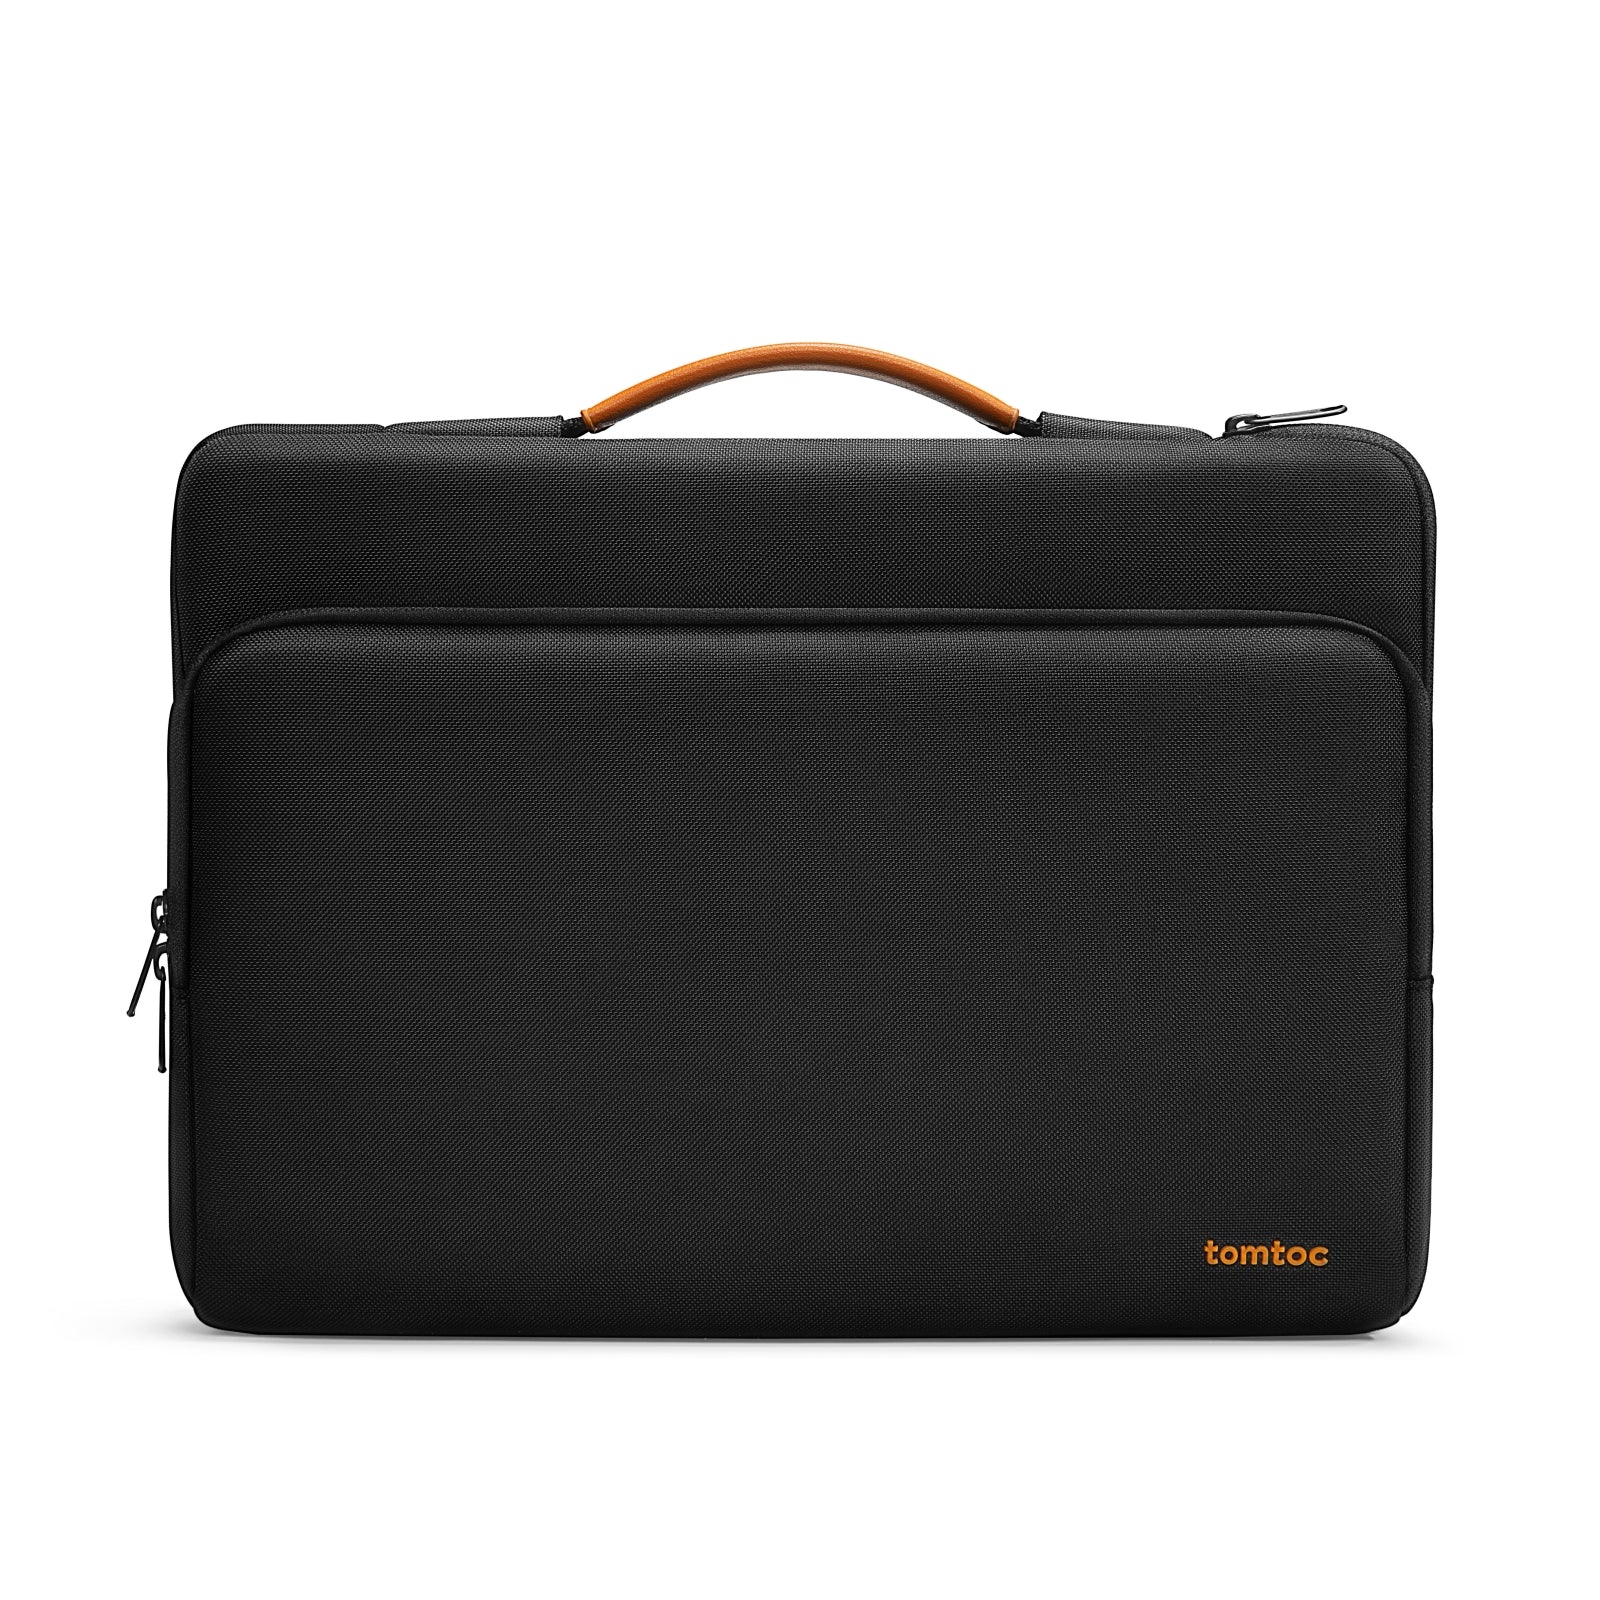 Defender-A14 Laptop Briefcase for for 13-inch MacBook Air | Black